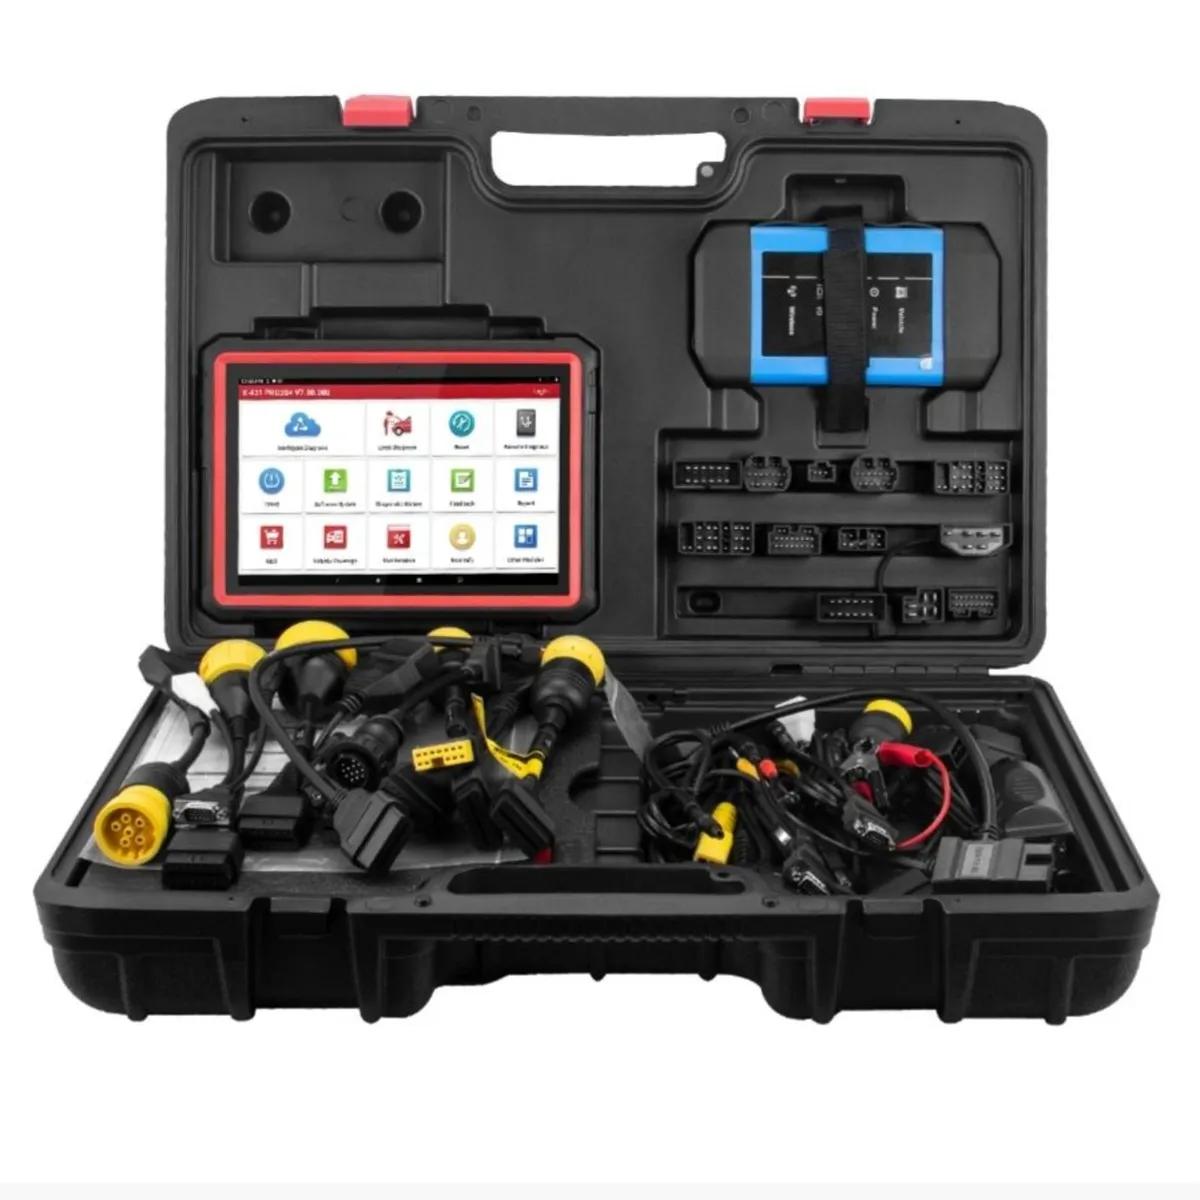 Auto Diagnostic and Remapping Laptop, Kess v2 Kit for sale in Co. Dublin  for €499 on DoneDeal